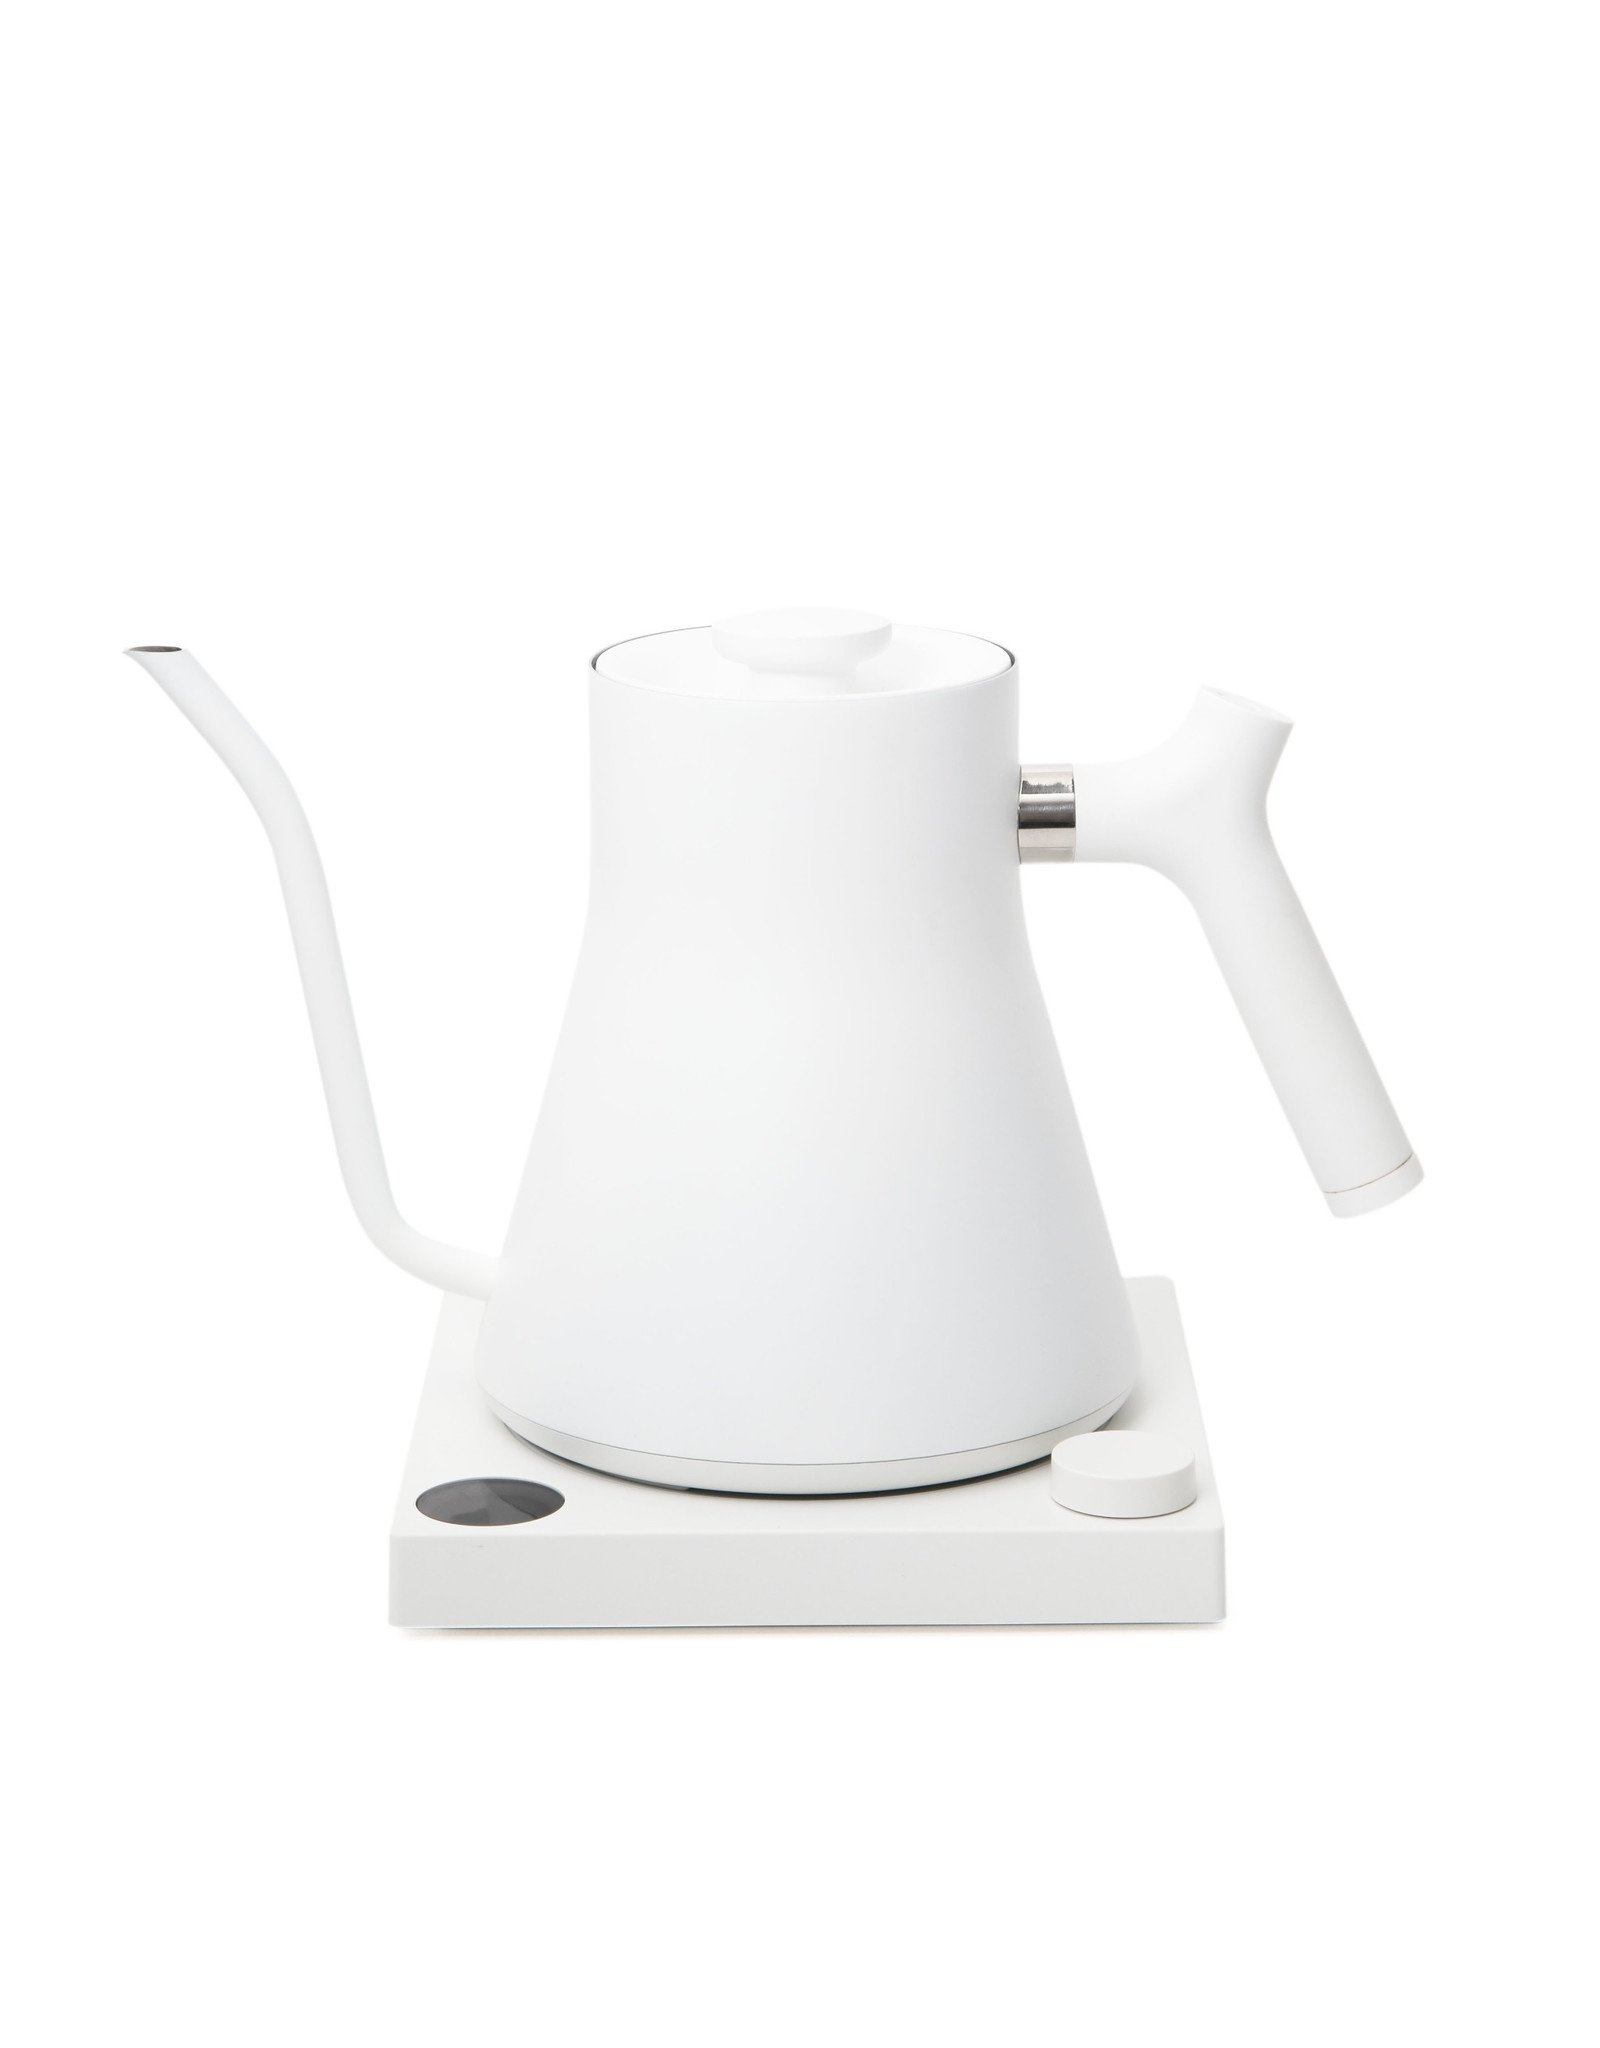 stagg electric pour over kettle